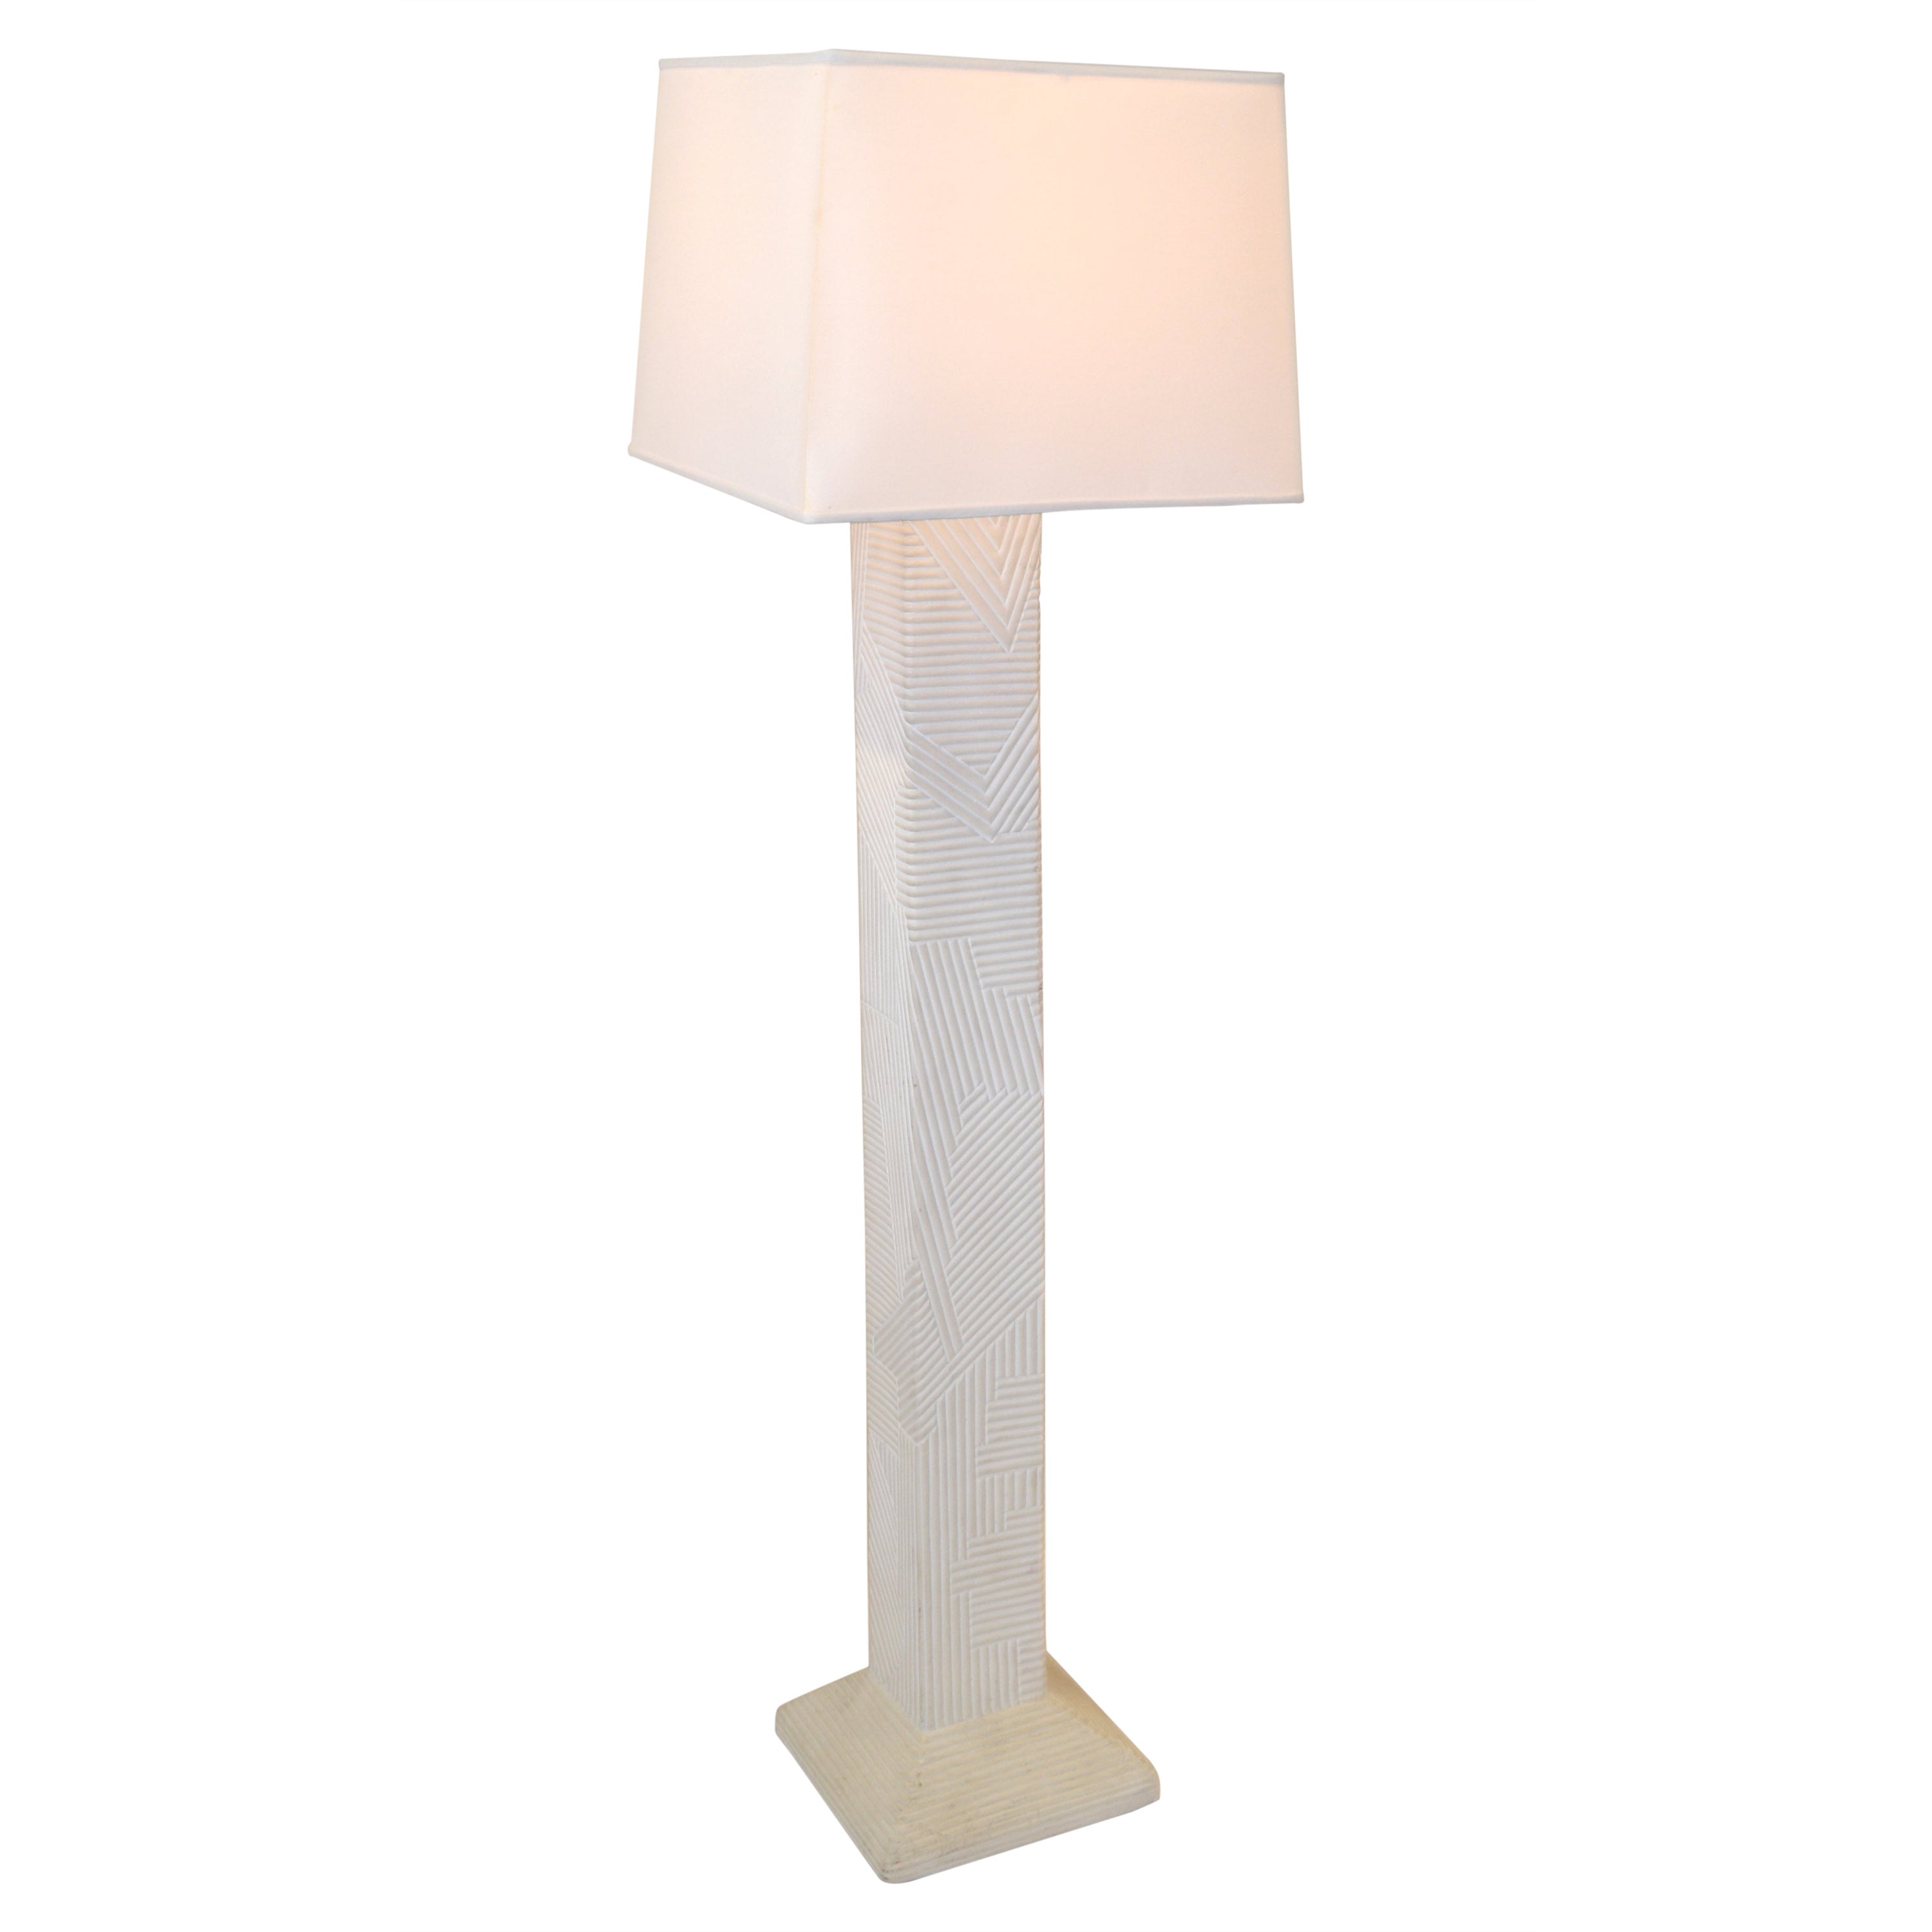 1970 Mid-Century Modern Geometric Textured Iconic Sculptural Plaster Lamp Sirmos For Sale